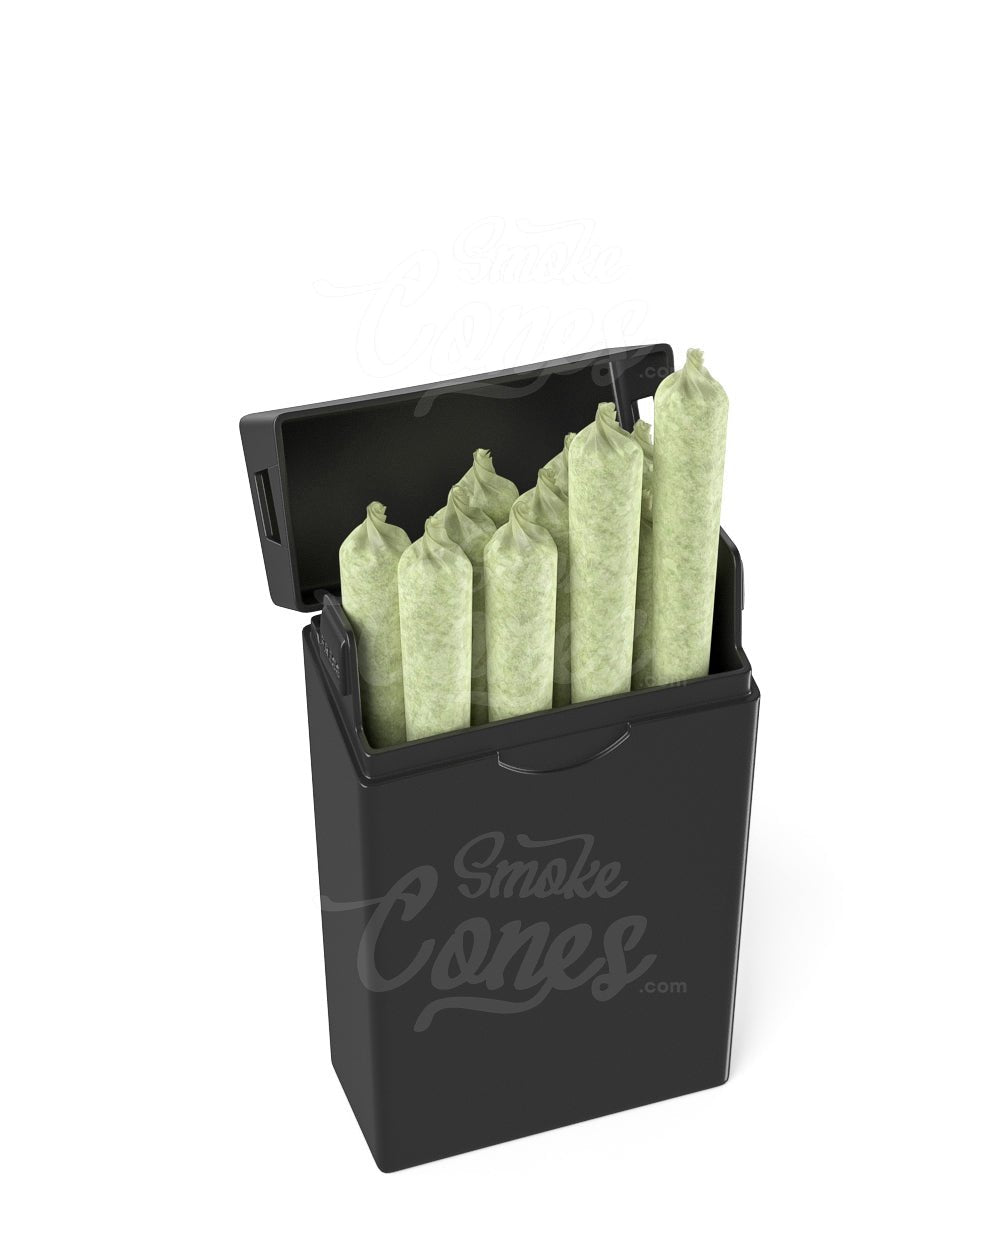 102mm CR Cone Pre-Roll Tube Opaque Gold (1000Qty) - Bulk Wholesale  Marijuana Packaging, Vape Cartridges, Joint Tubes, Custom Labels, and More!